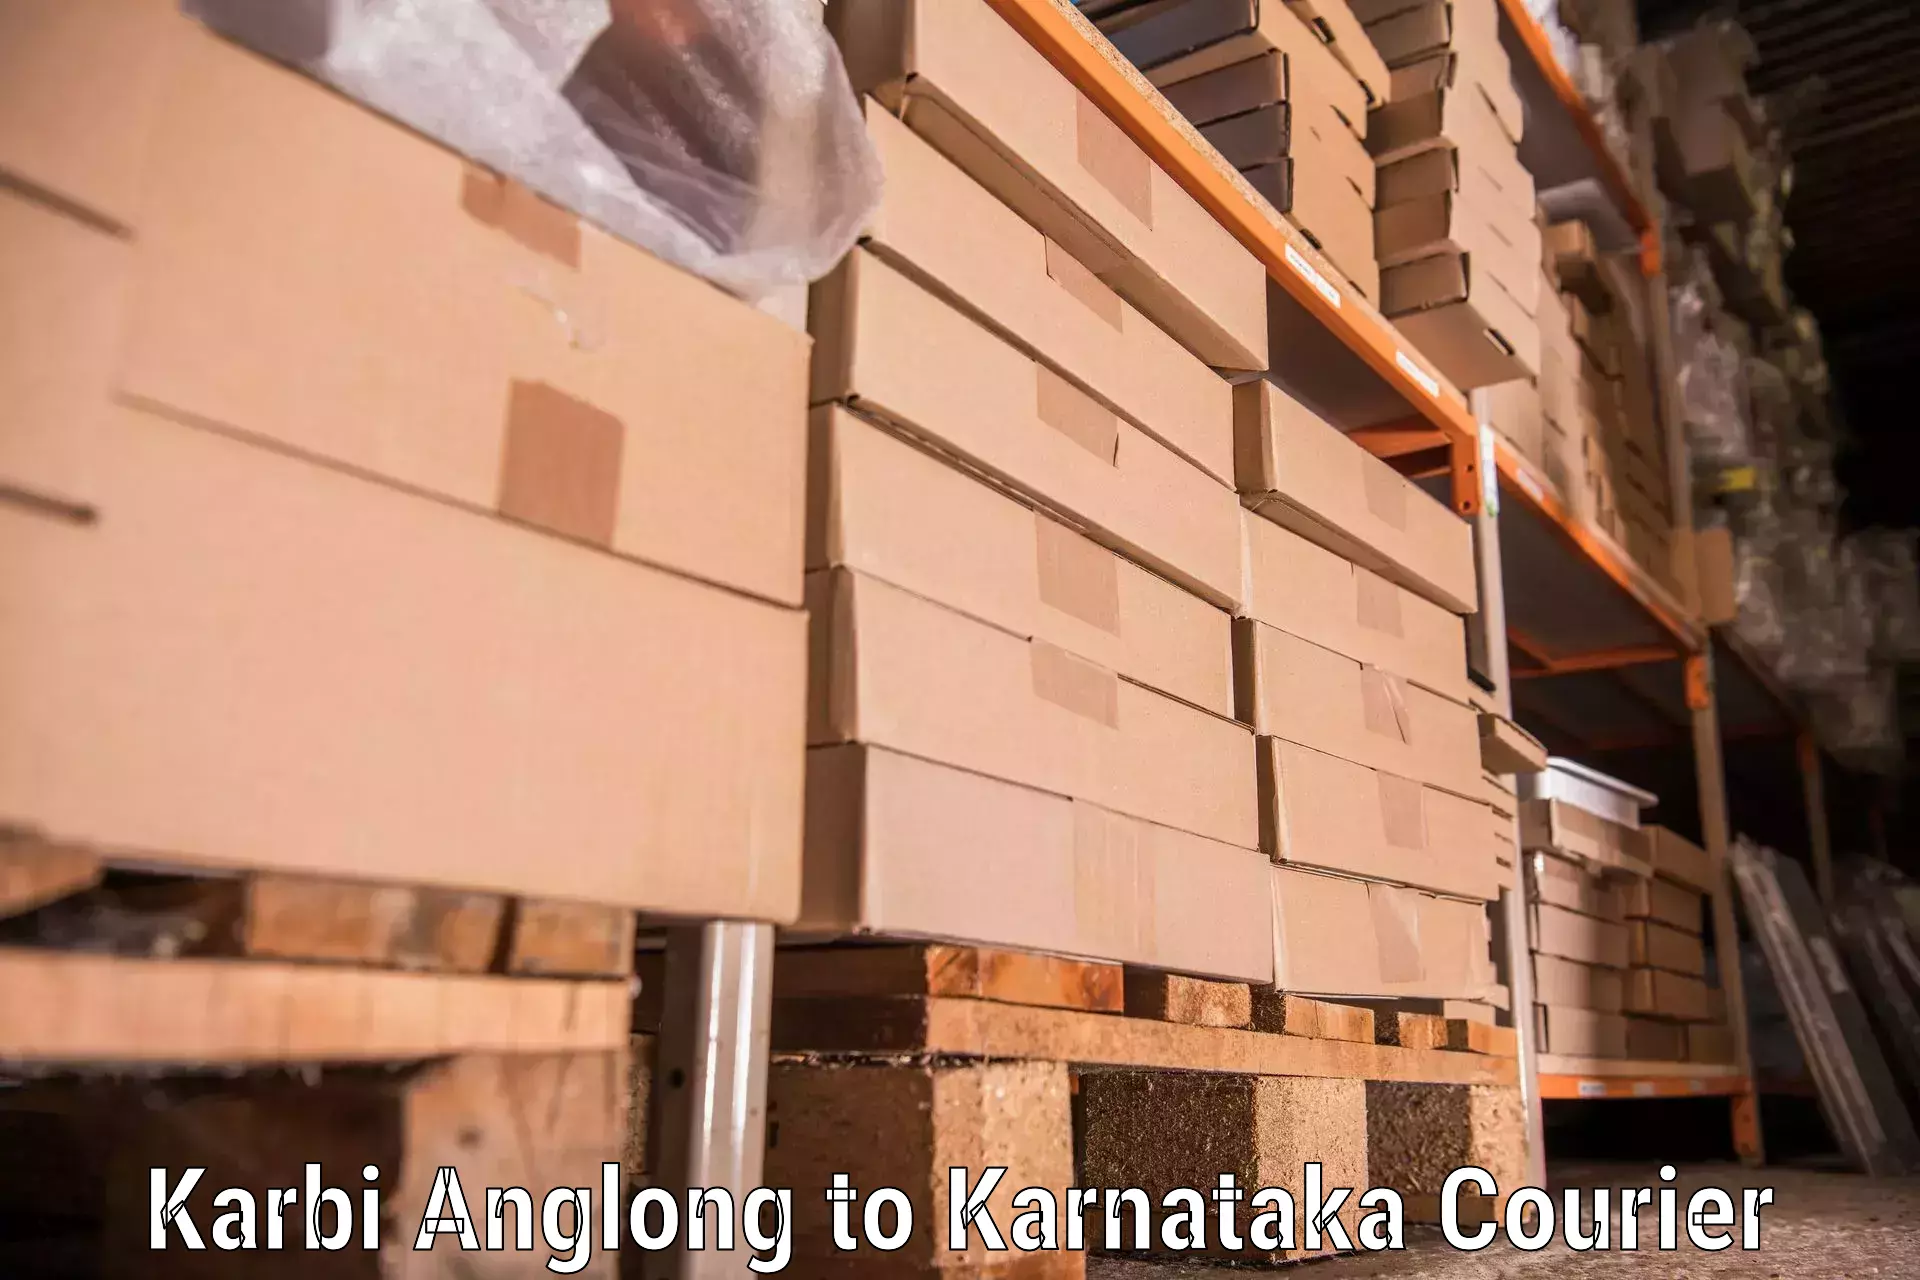 Efficient relocation services in Karbi Anglong to Karnataka